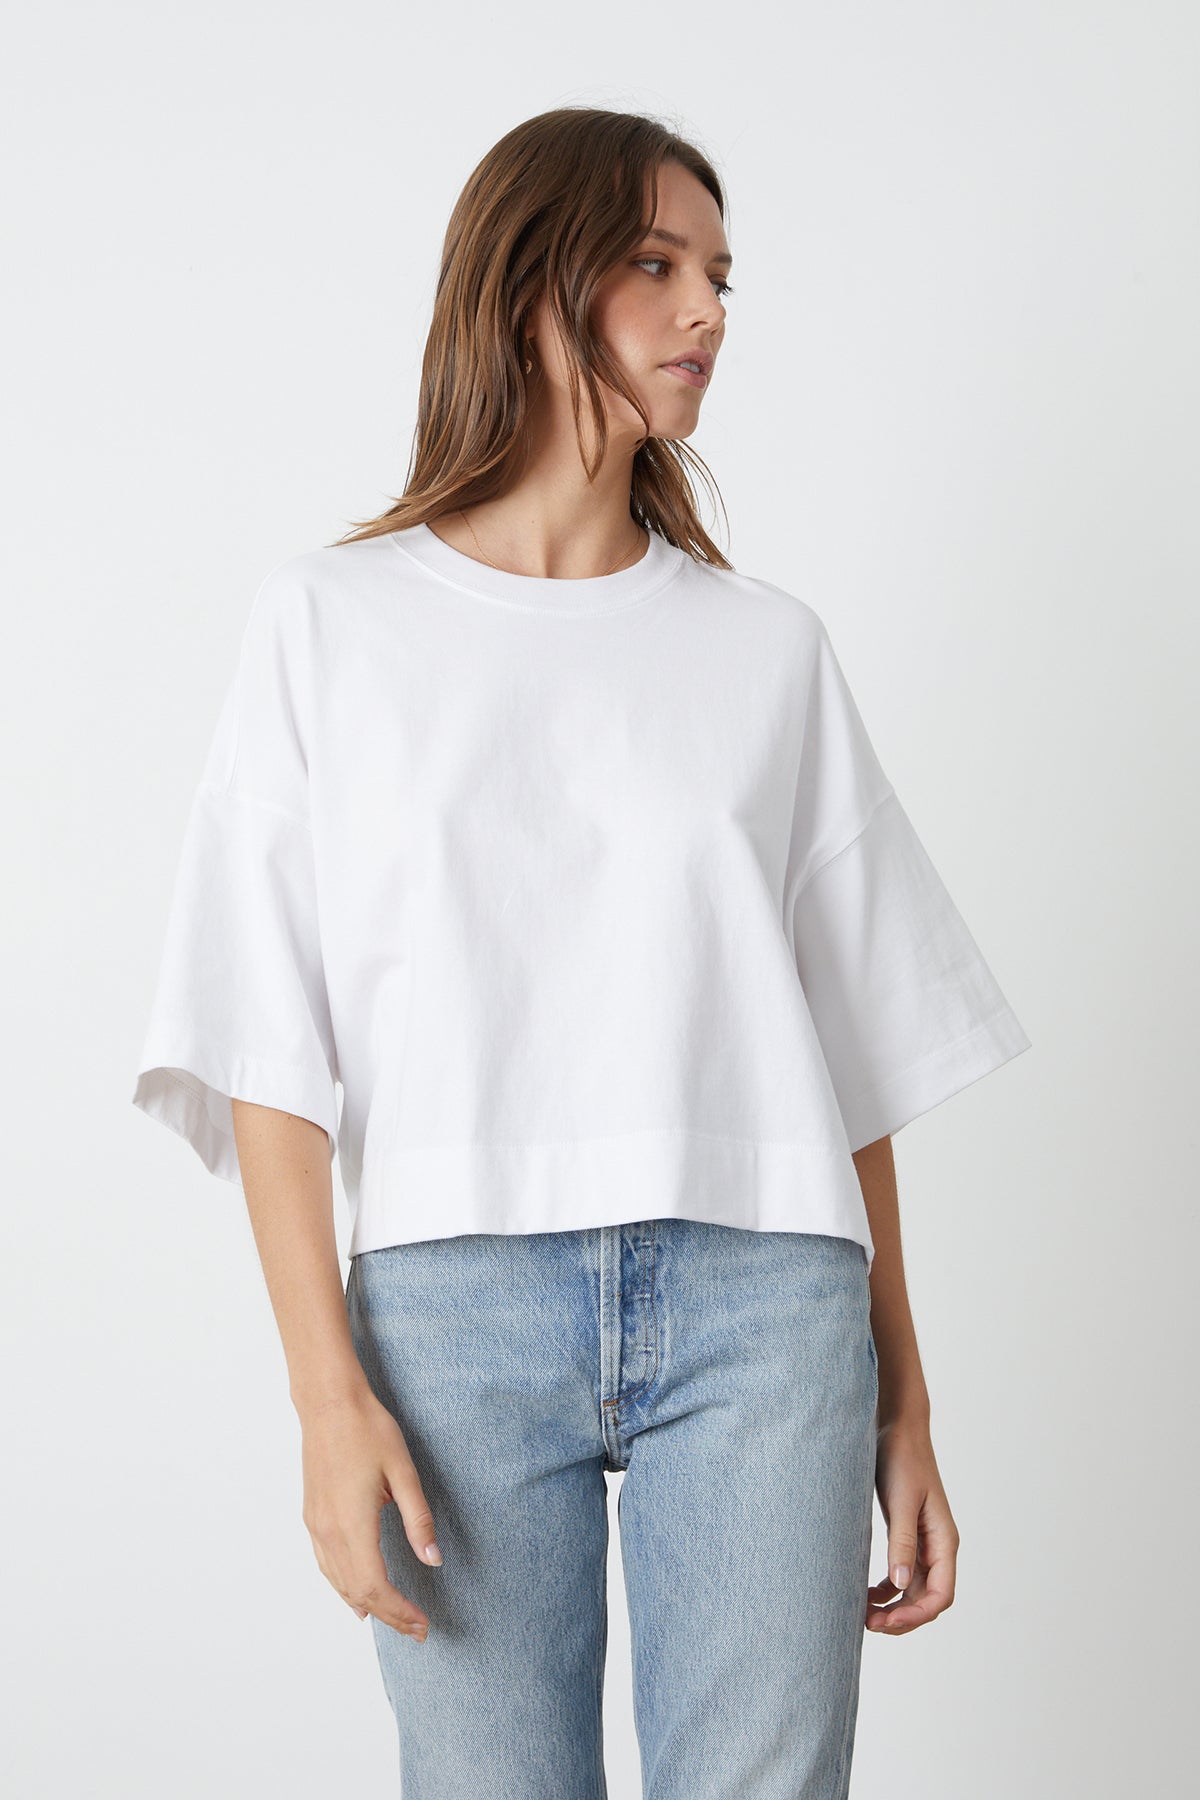 Aimee Cropped Tee with blue denim front-26255694725313